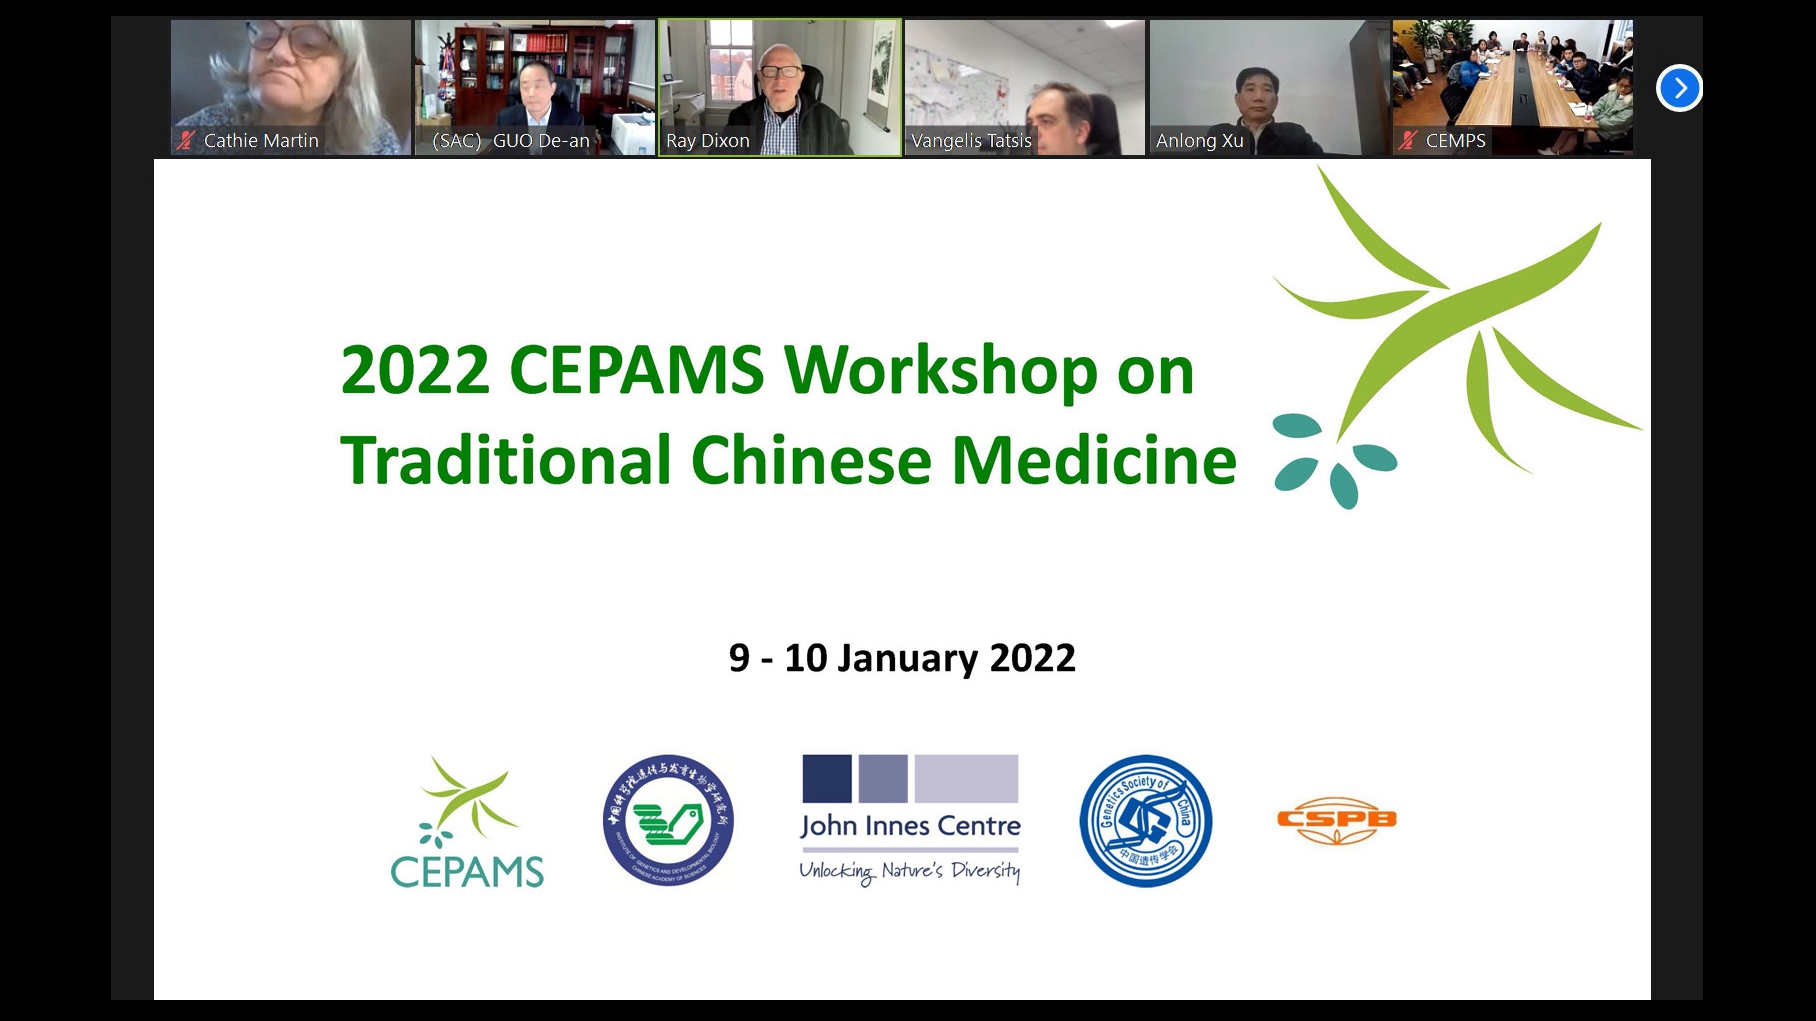 CEPAMS Organizes Sino-UK Workshop to Promote Traditional Chinese Medicine Research